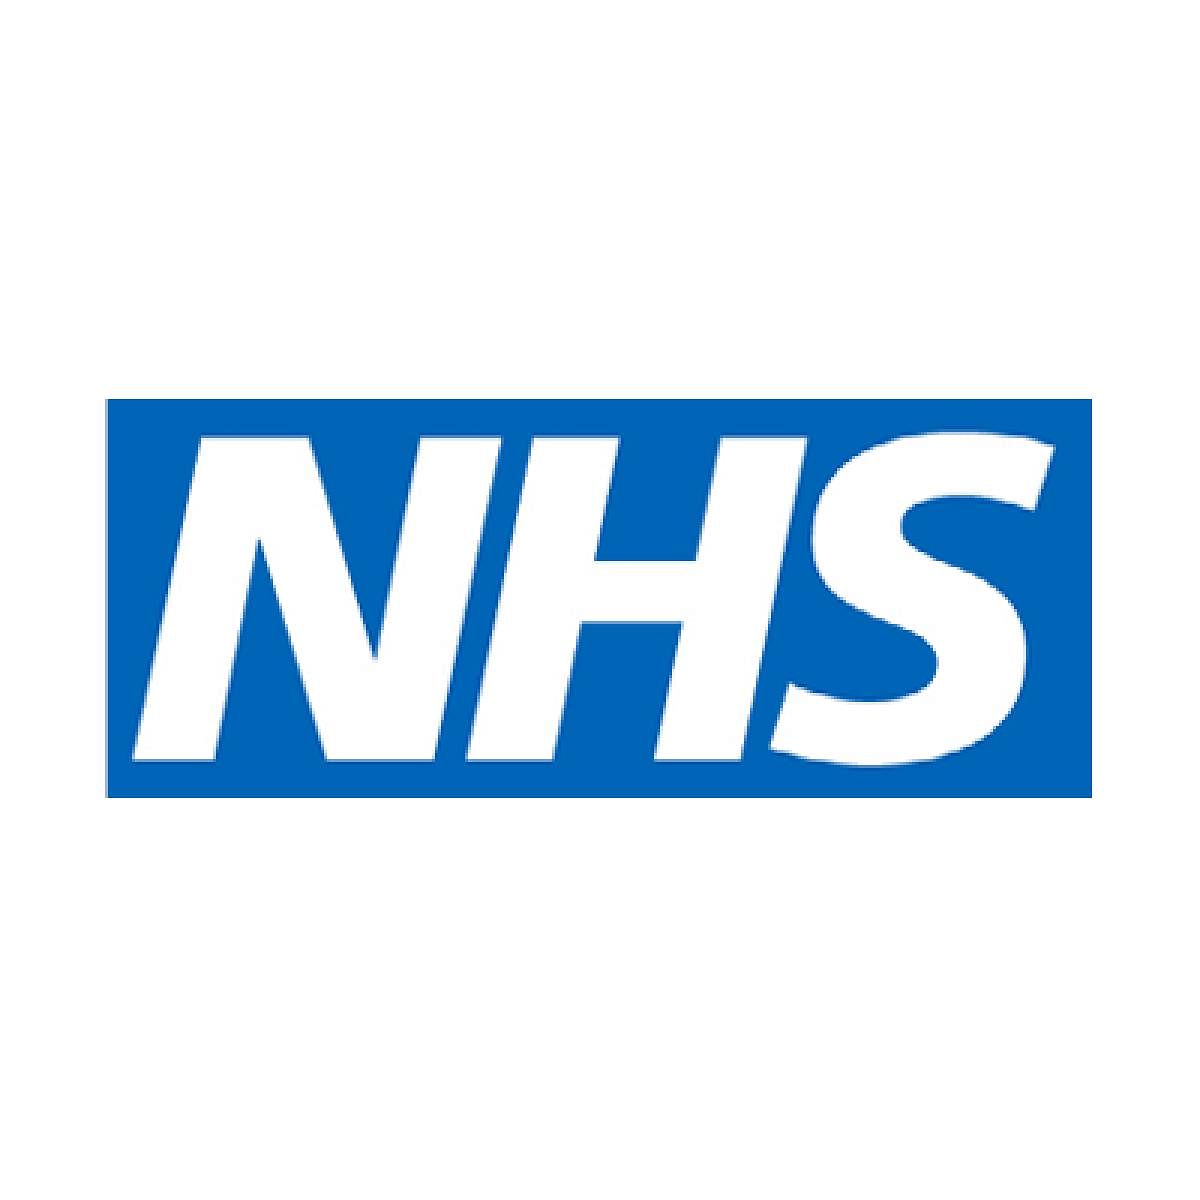 Forbes magazine said in 2015 that the NHS had 1.7 million staff, making it the world's fifth-biggest employer behind the US and Chinese armed forces, Walmart and McDonald's. Photo (Twitter/@NHSEngland)